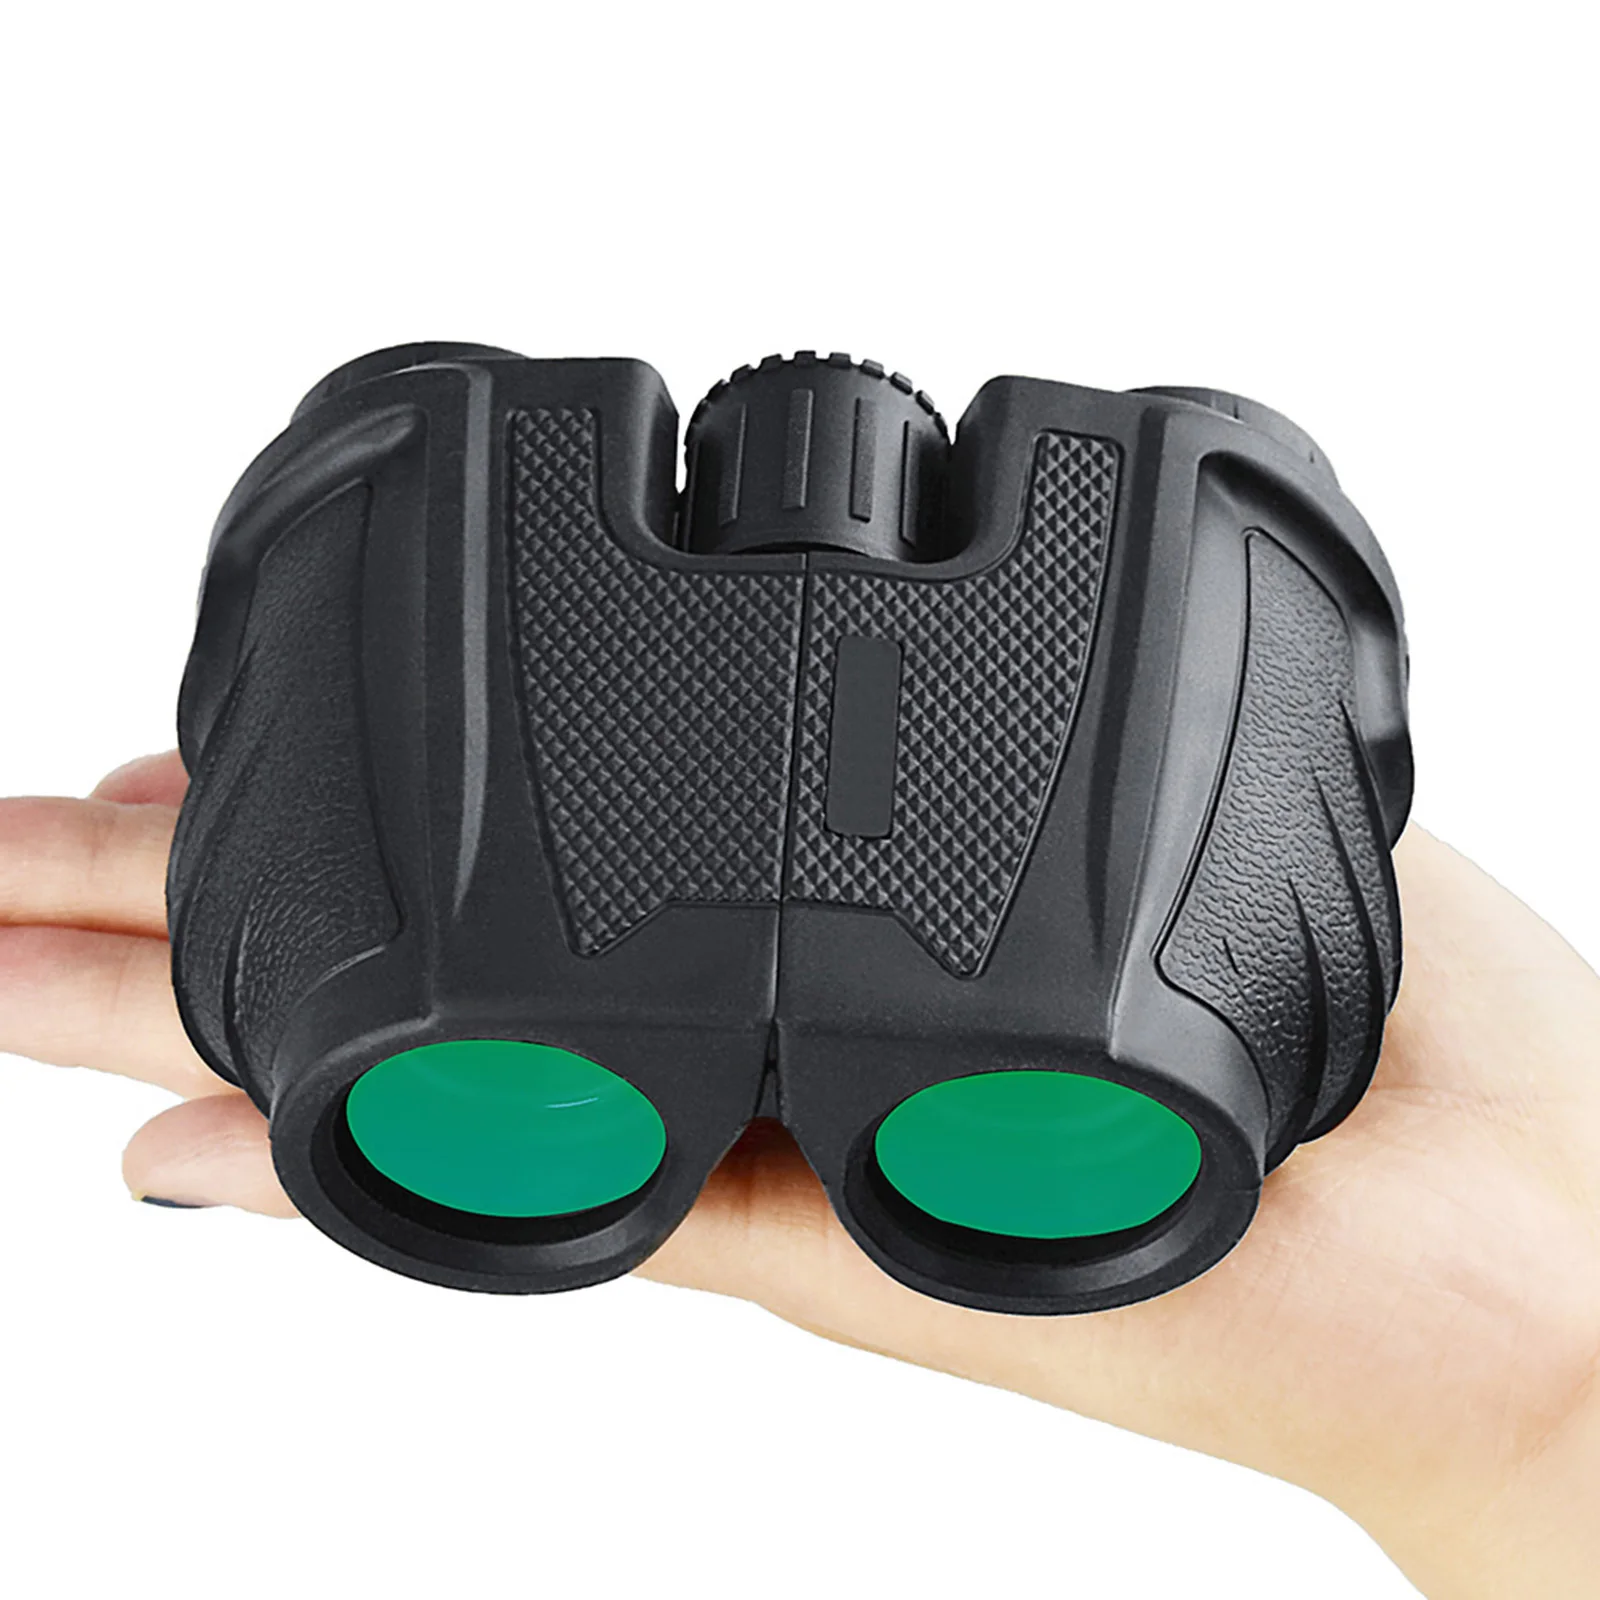 12x25 Binoculars for Adults and Kids, Compact Binoculars for Bird Watching with Clear Low Light Night